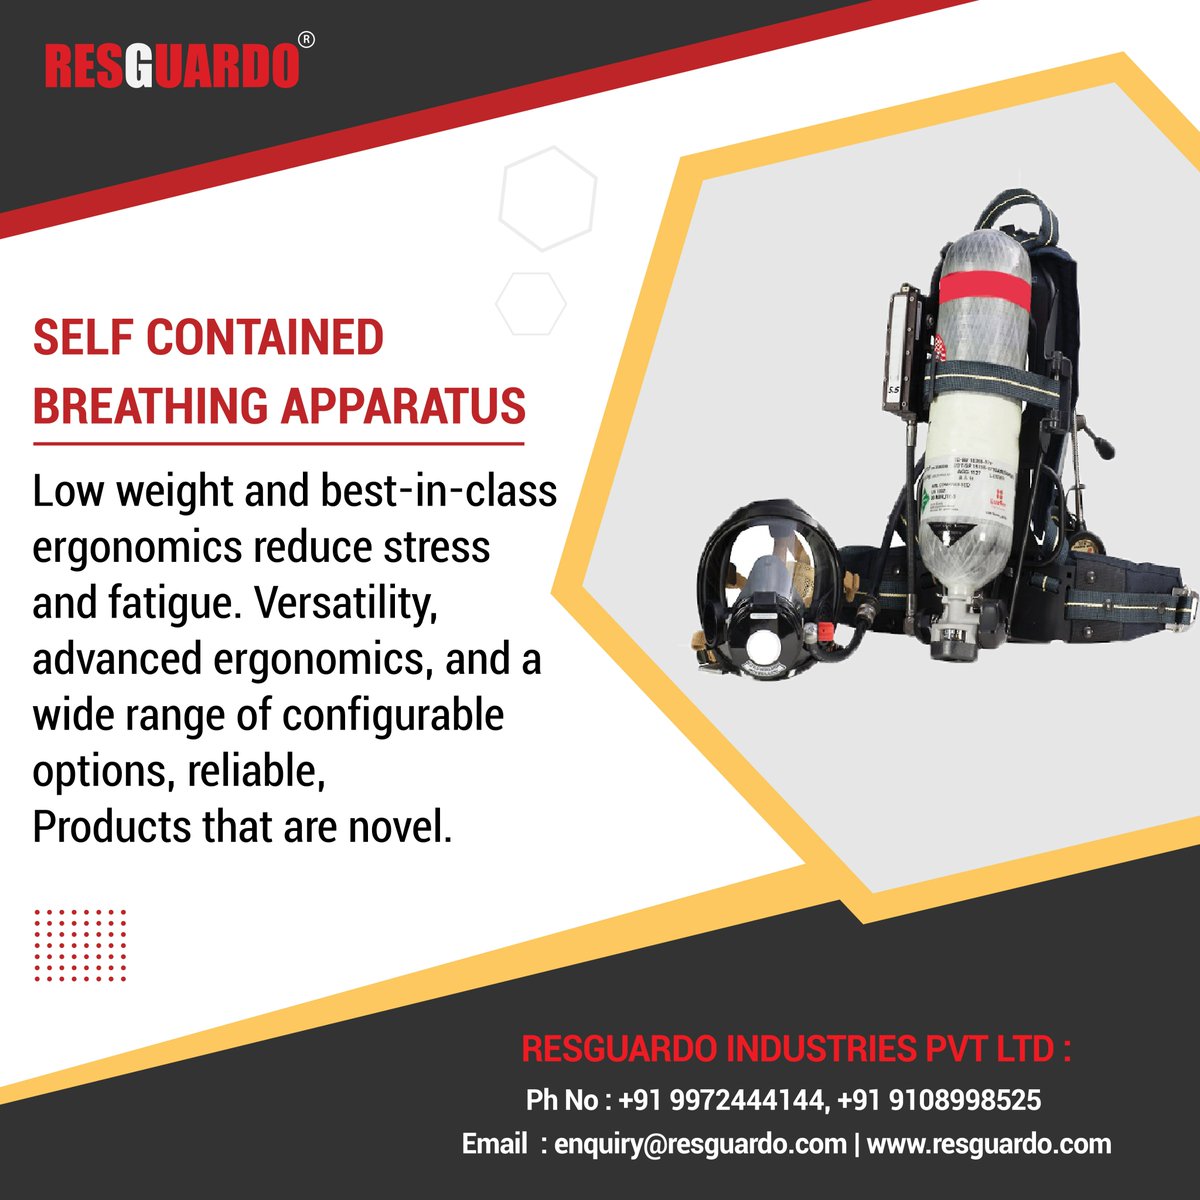 Advanced Breathing Apparatuses for Safety, Reliability, and Usability Professional Safety Technology and Personal Protective Equipment Manufacturer.

#scba #selfcontainedbreathingapparatus #safetyequiptment #firesafety #firesafetyproducts  #firesafetytips #resguardo